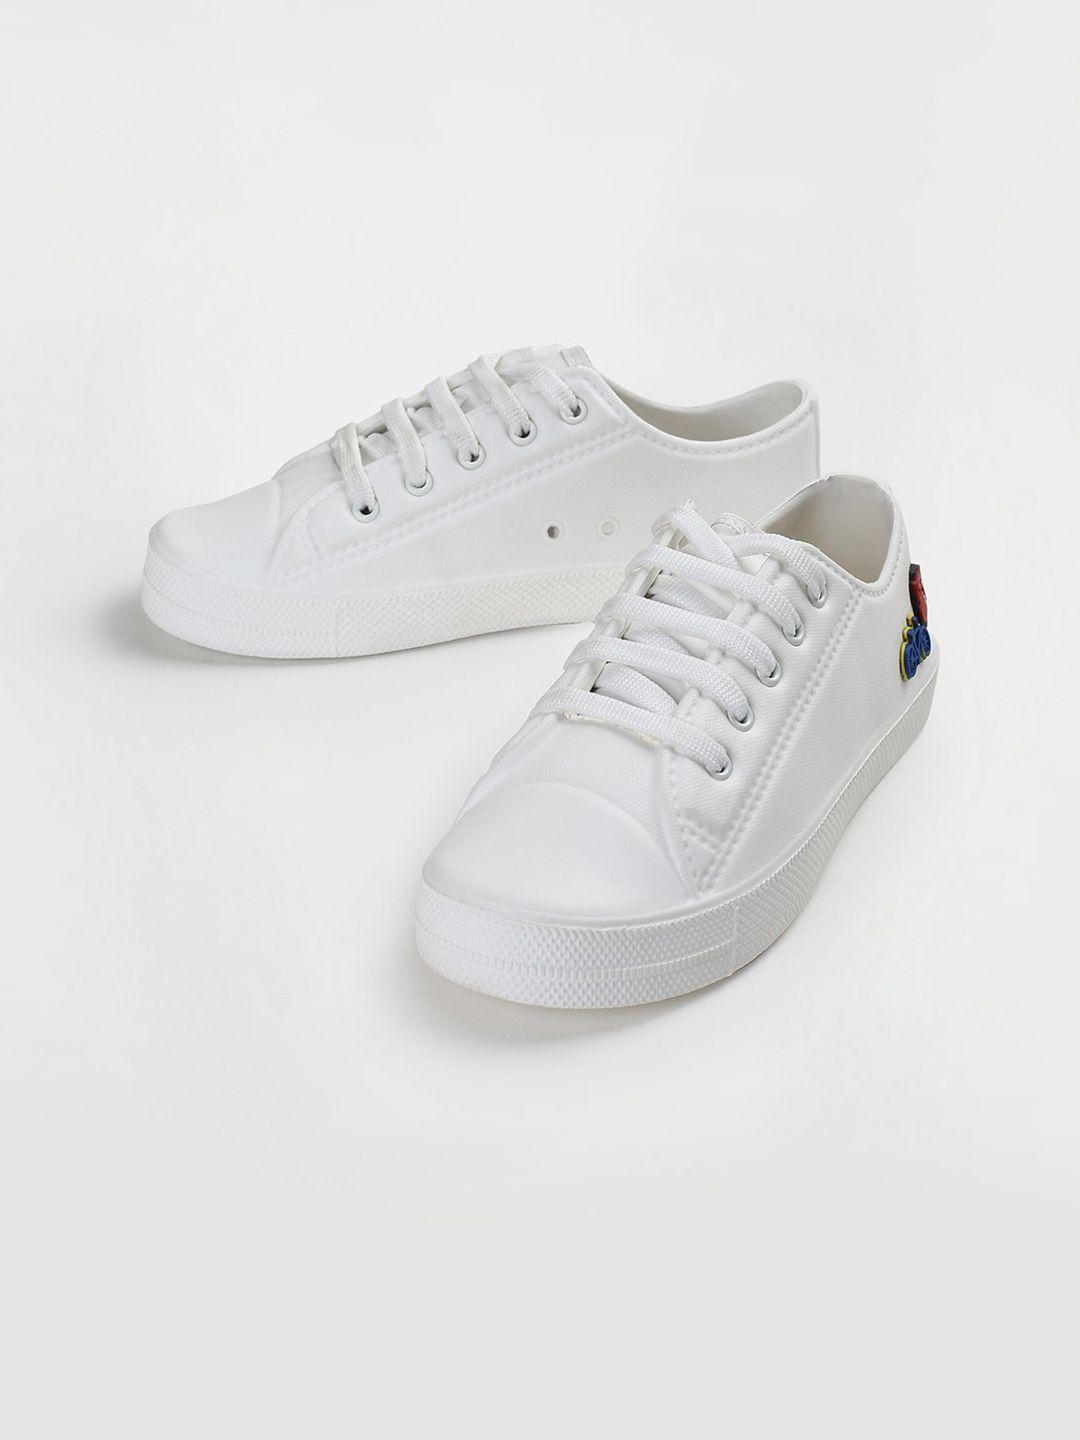 max-boys-moulded-jibbitz-lace-up-sneakers